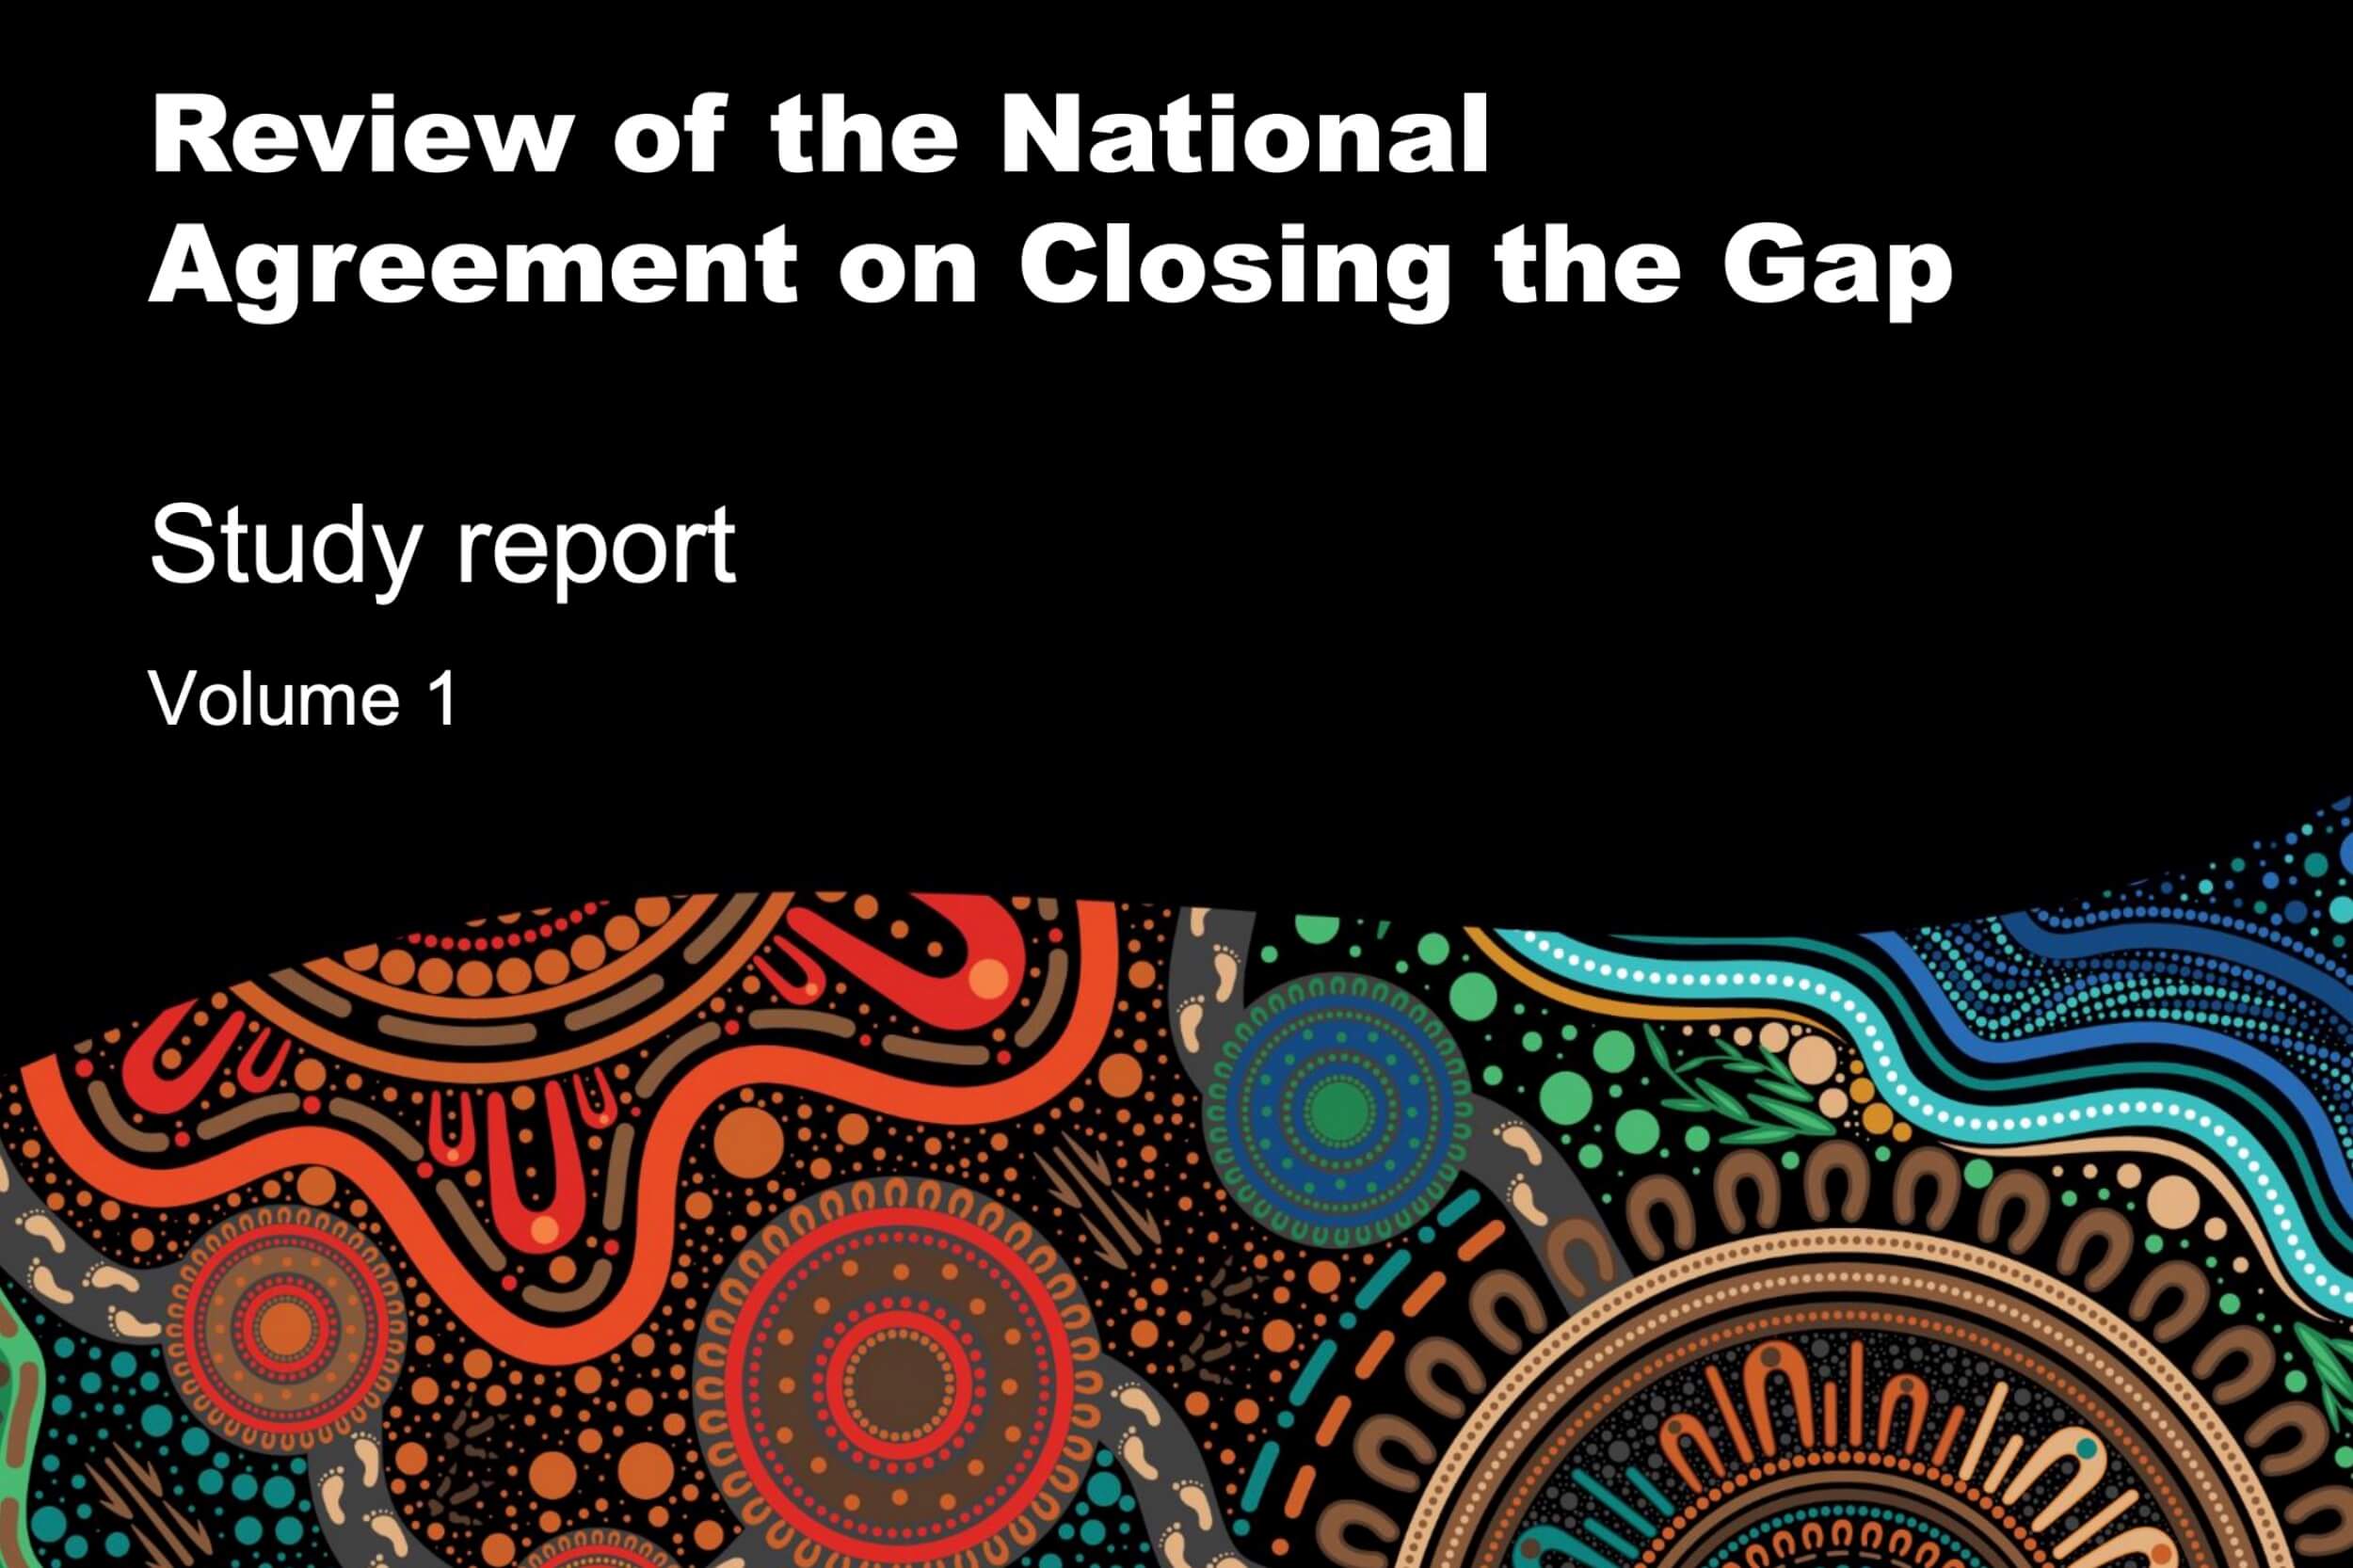 The National Agreement on Closing the Gap is an opportunity governments cannot continue to waste